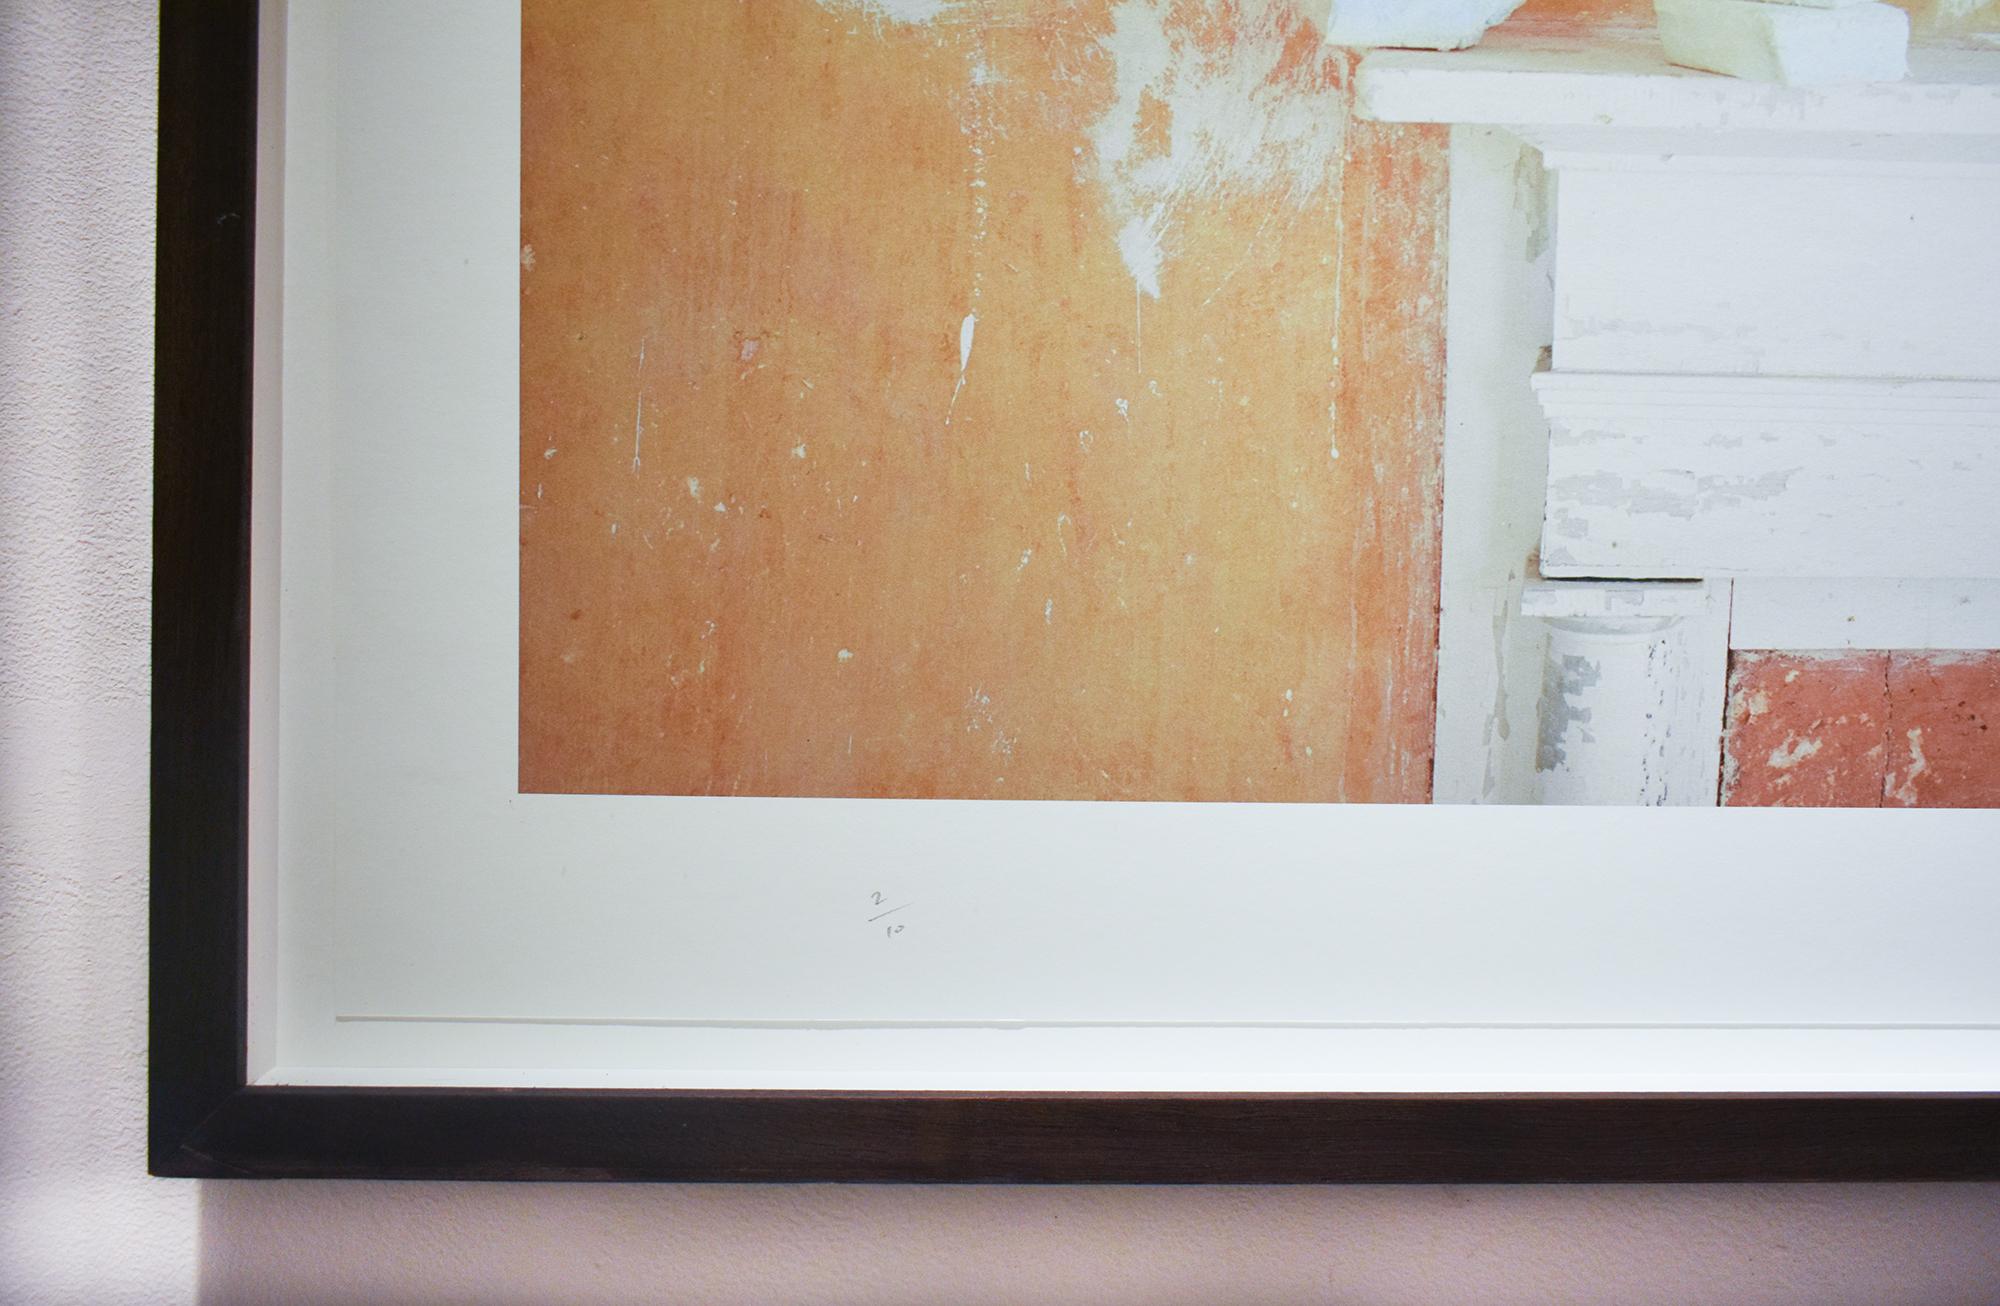 Contemporary still life photograph of faint orange wall with white plaster patches
archival pigment print, ed 2 of 10 
22.25 x 40 inches unframed
28.75 x 46 inches in dark wood frame with non-glare glass

In this series, Halliday captures the